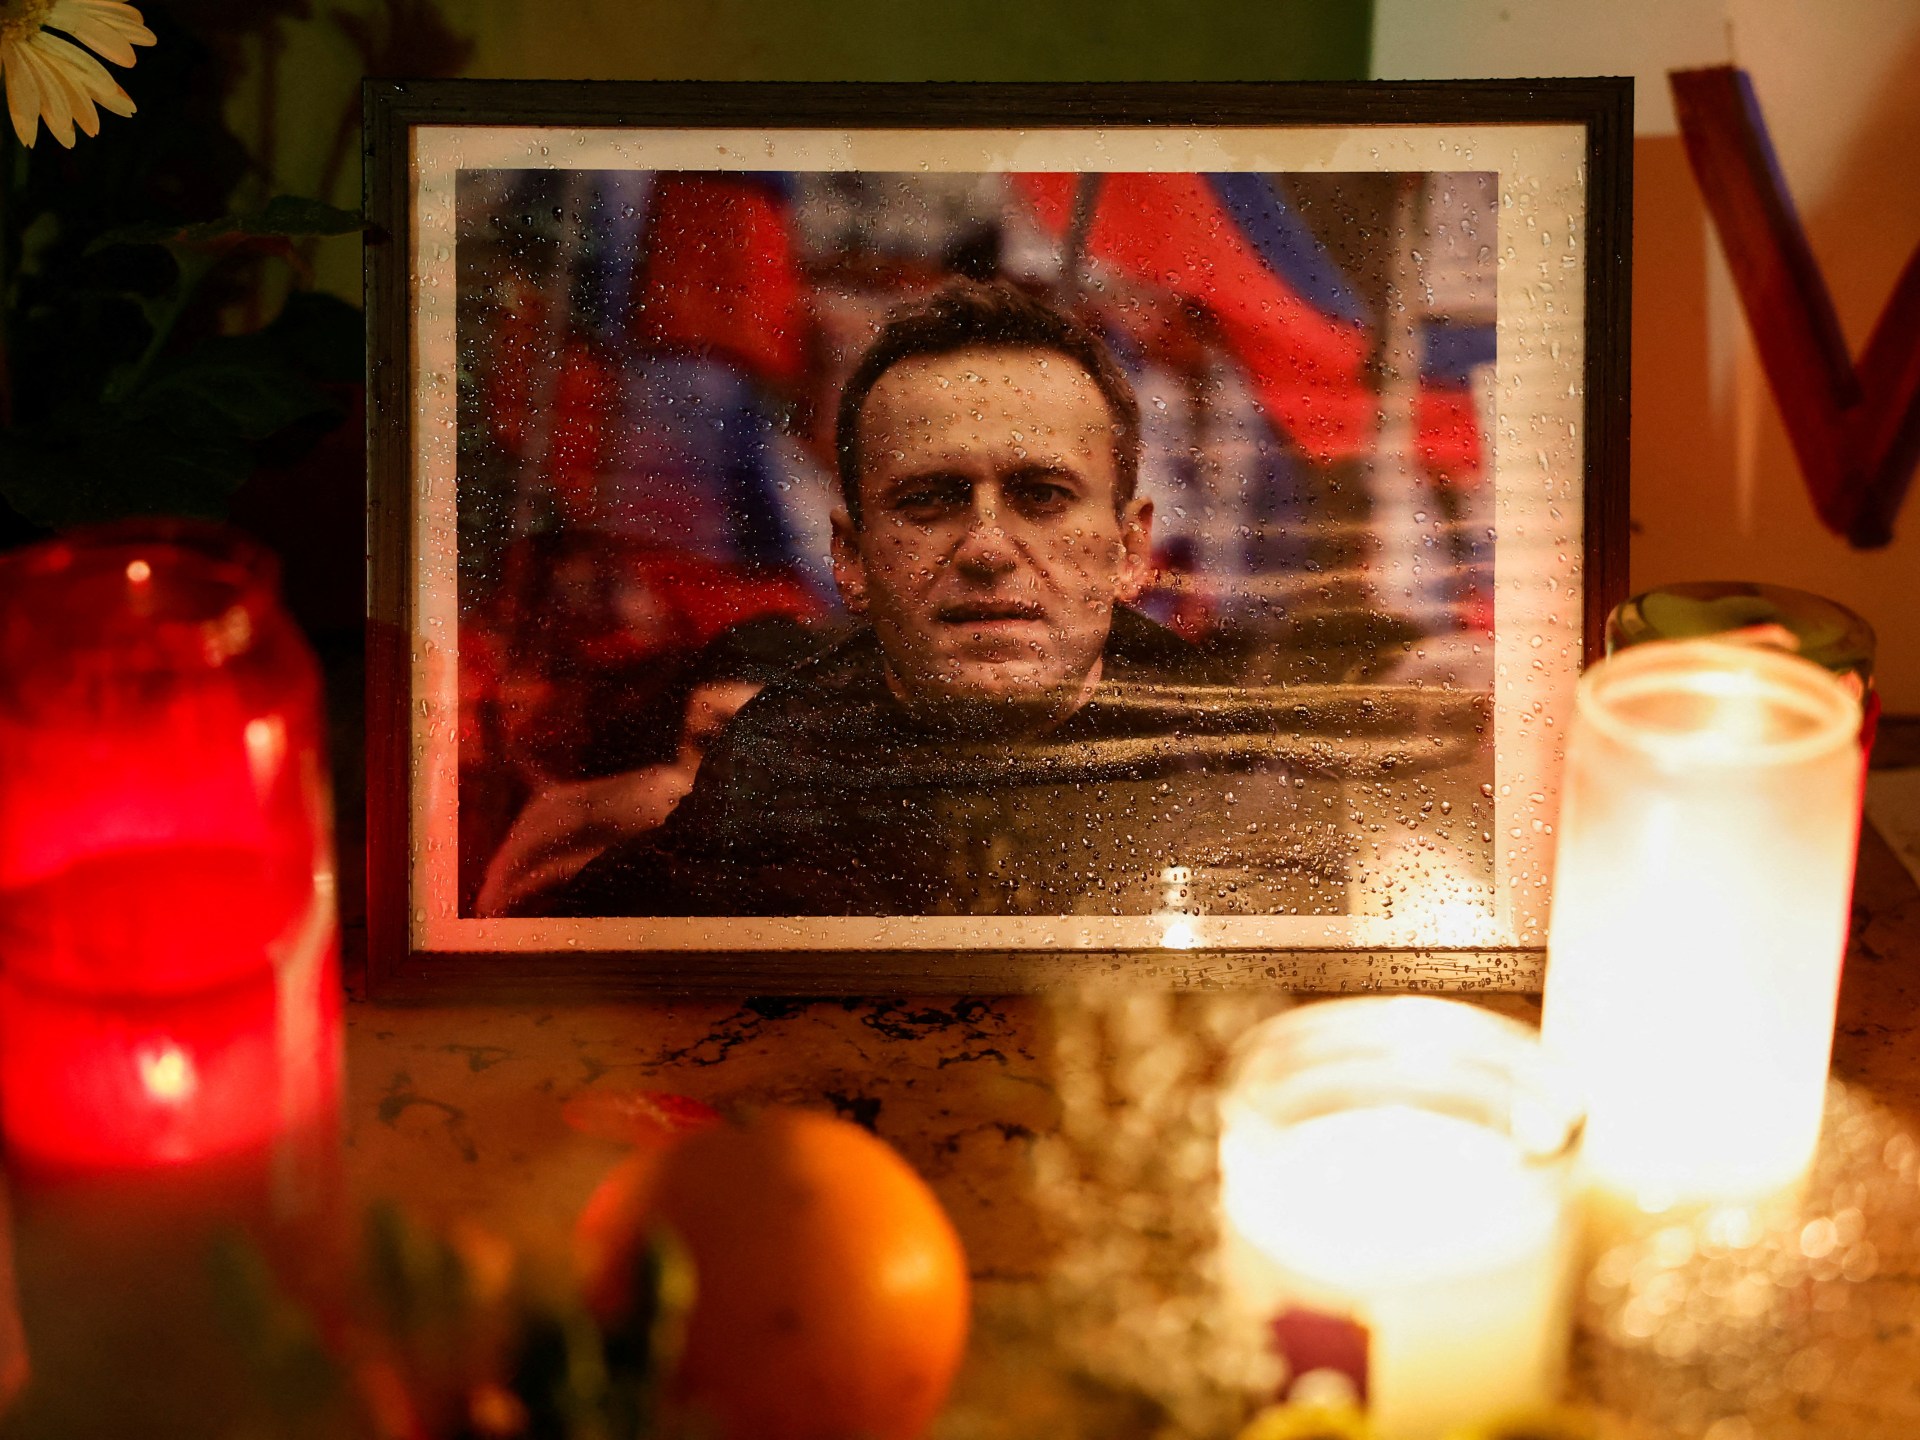 Funeral of Kremlin critic Navalny to be held in Moscow on Friday